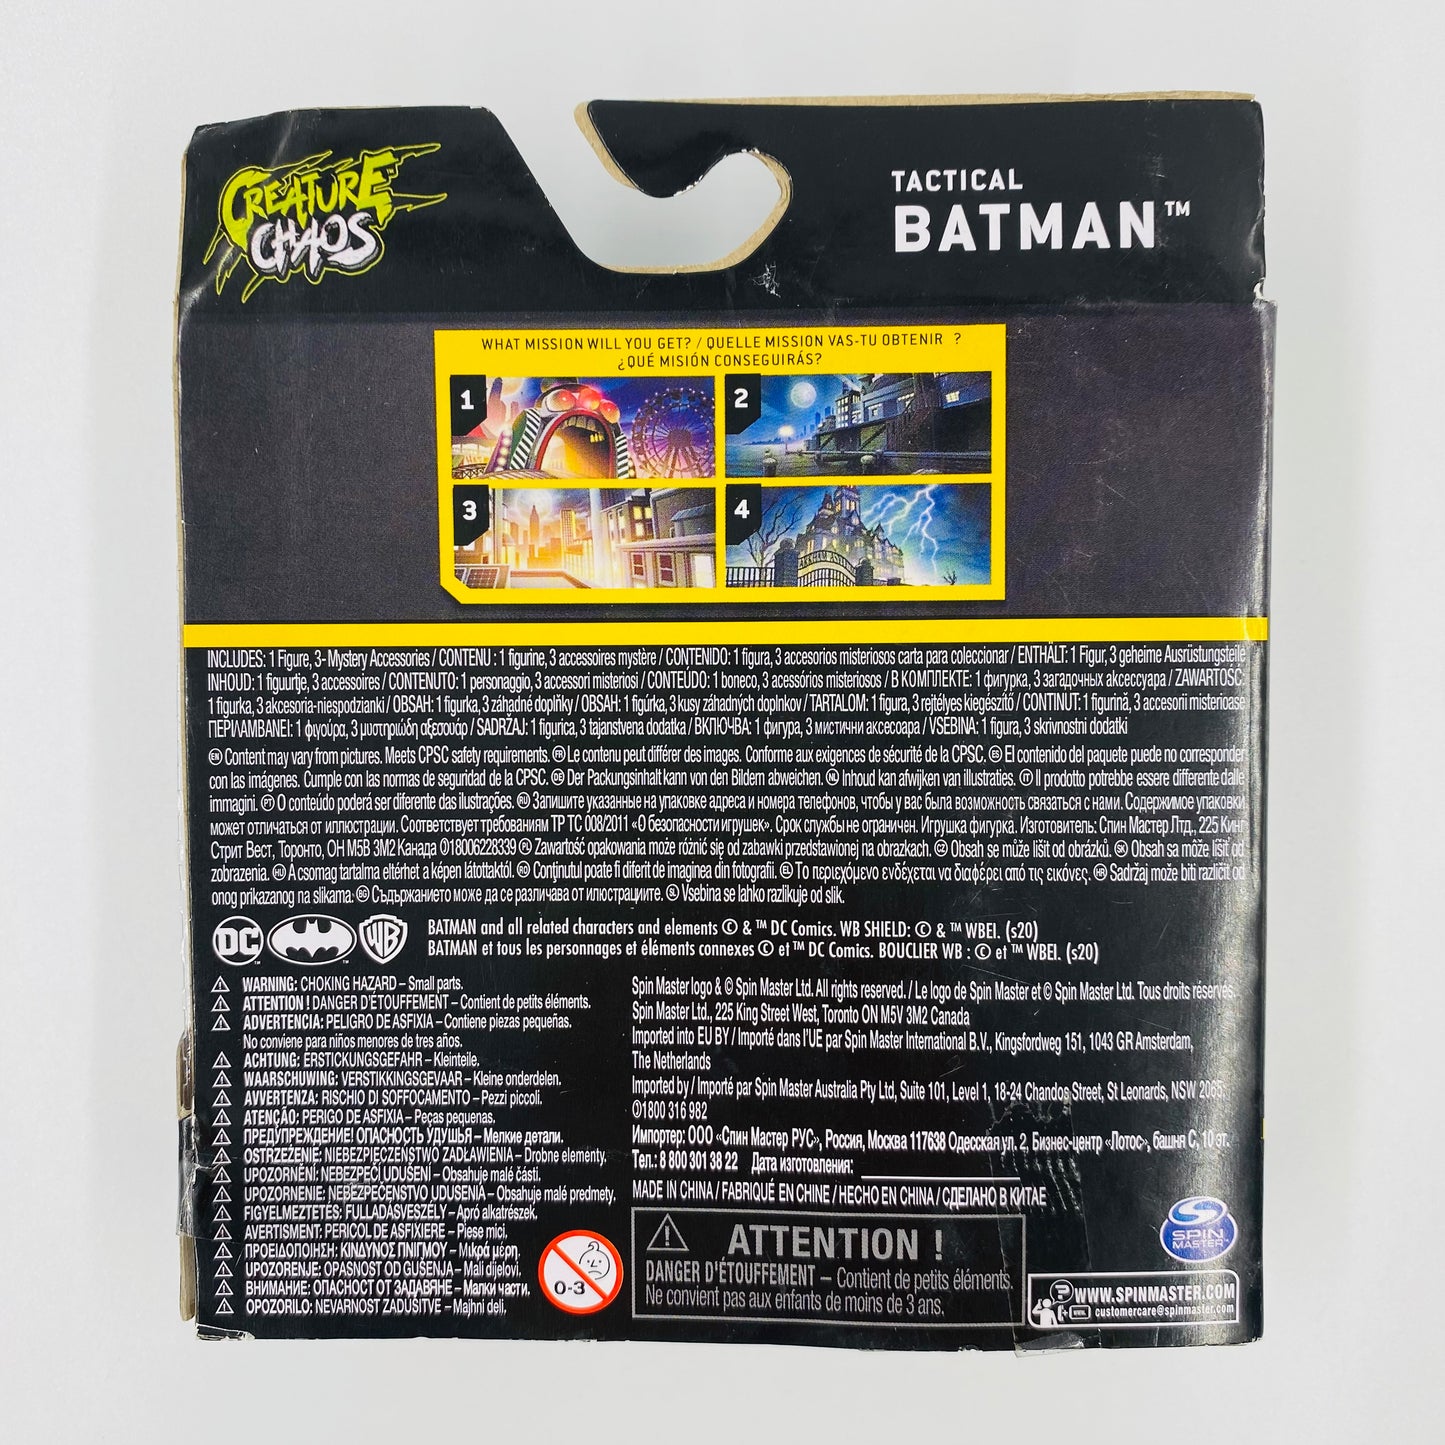 Batman The Caped Crusader Creature Chaos Tactical Batman carded 4” action figure (2020) Spin Master